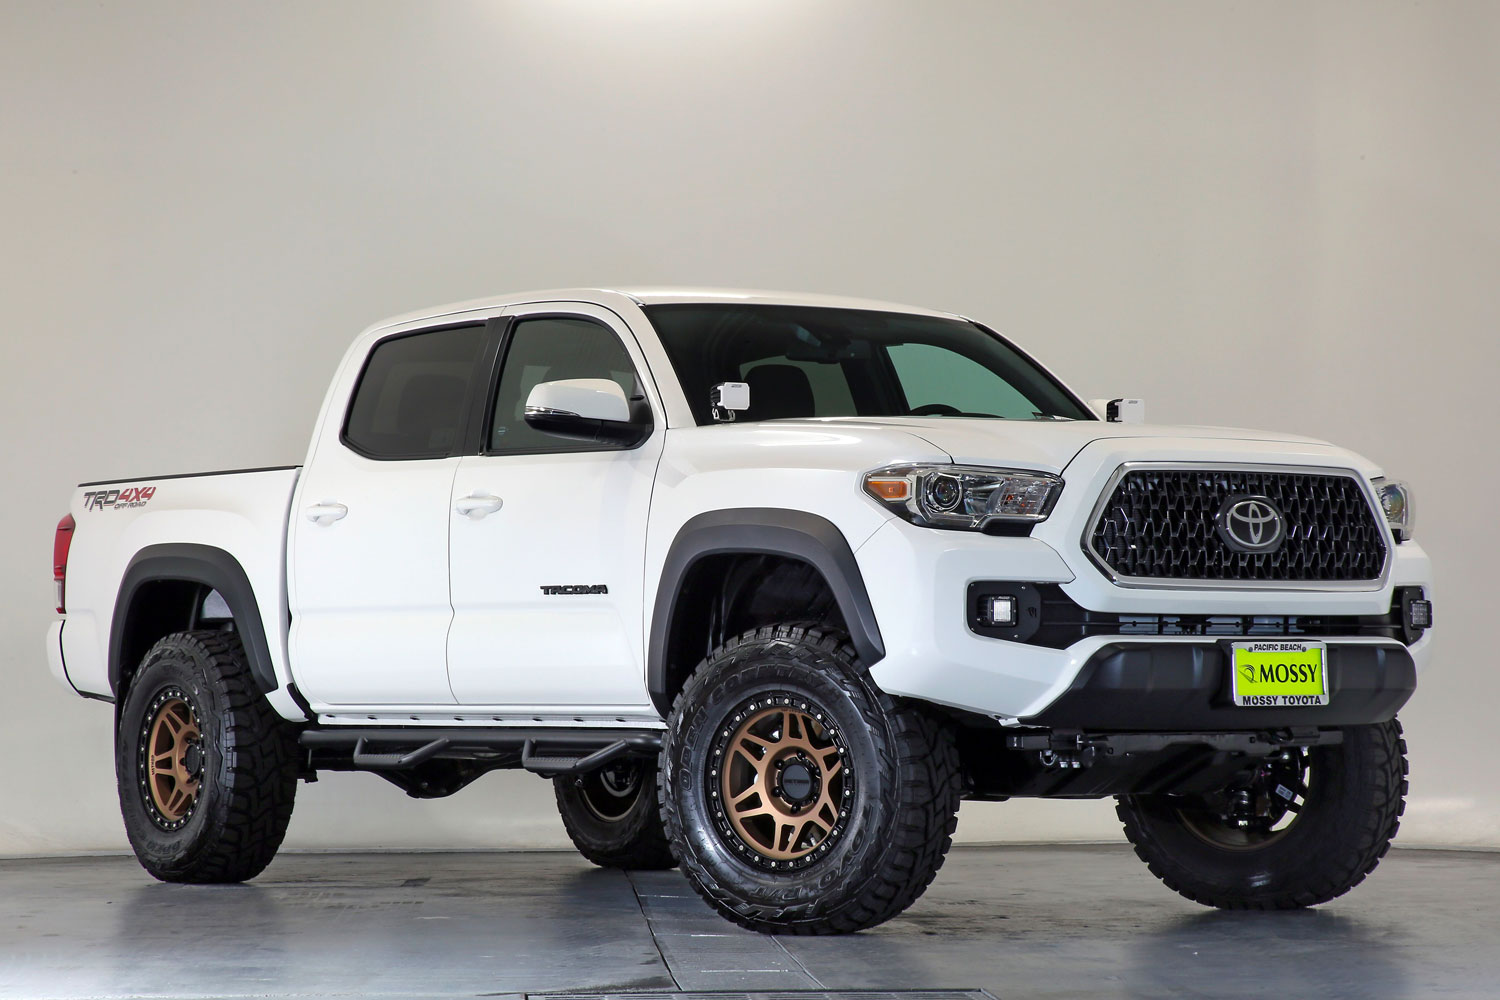 MOSSY - TACOMA STAGE 3 (Wheel & Tire Package with 3 Inch Liftl Kit)